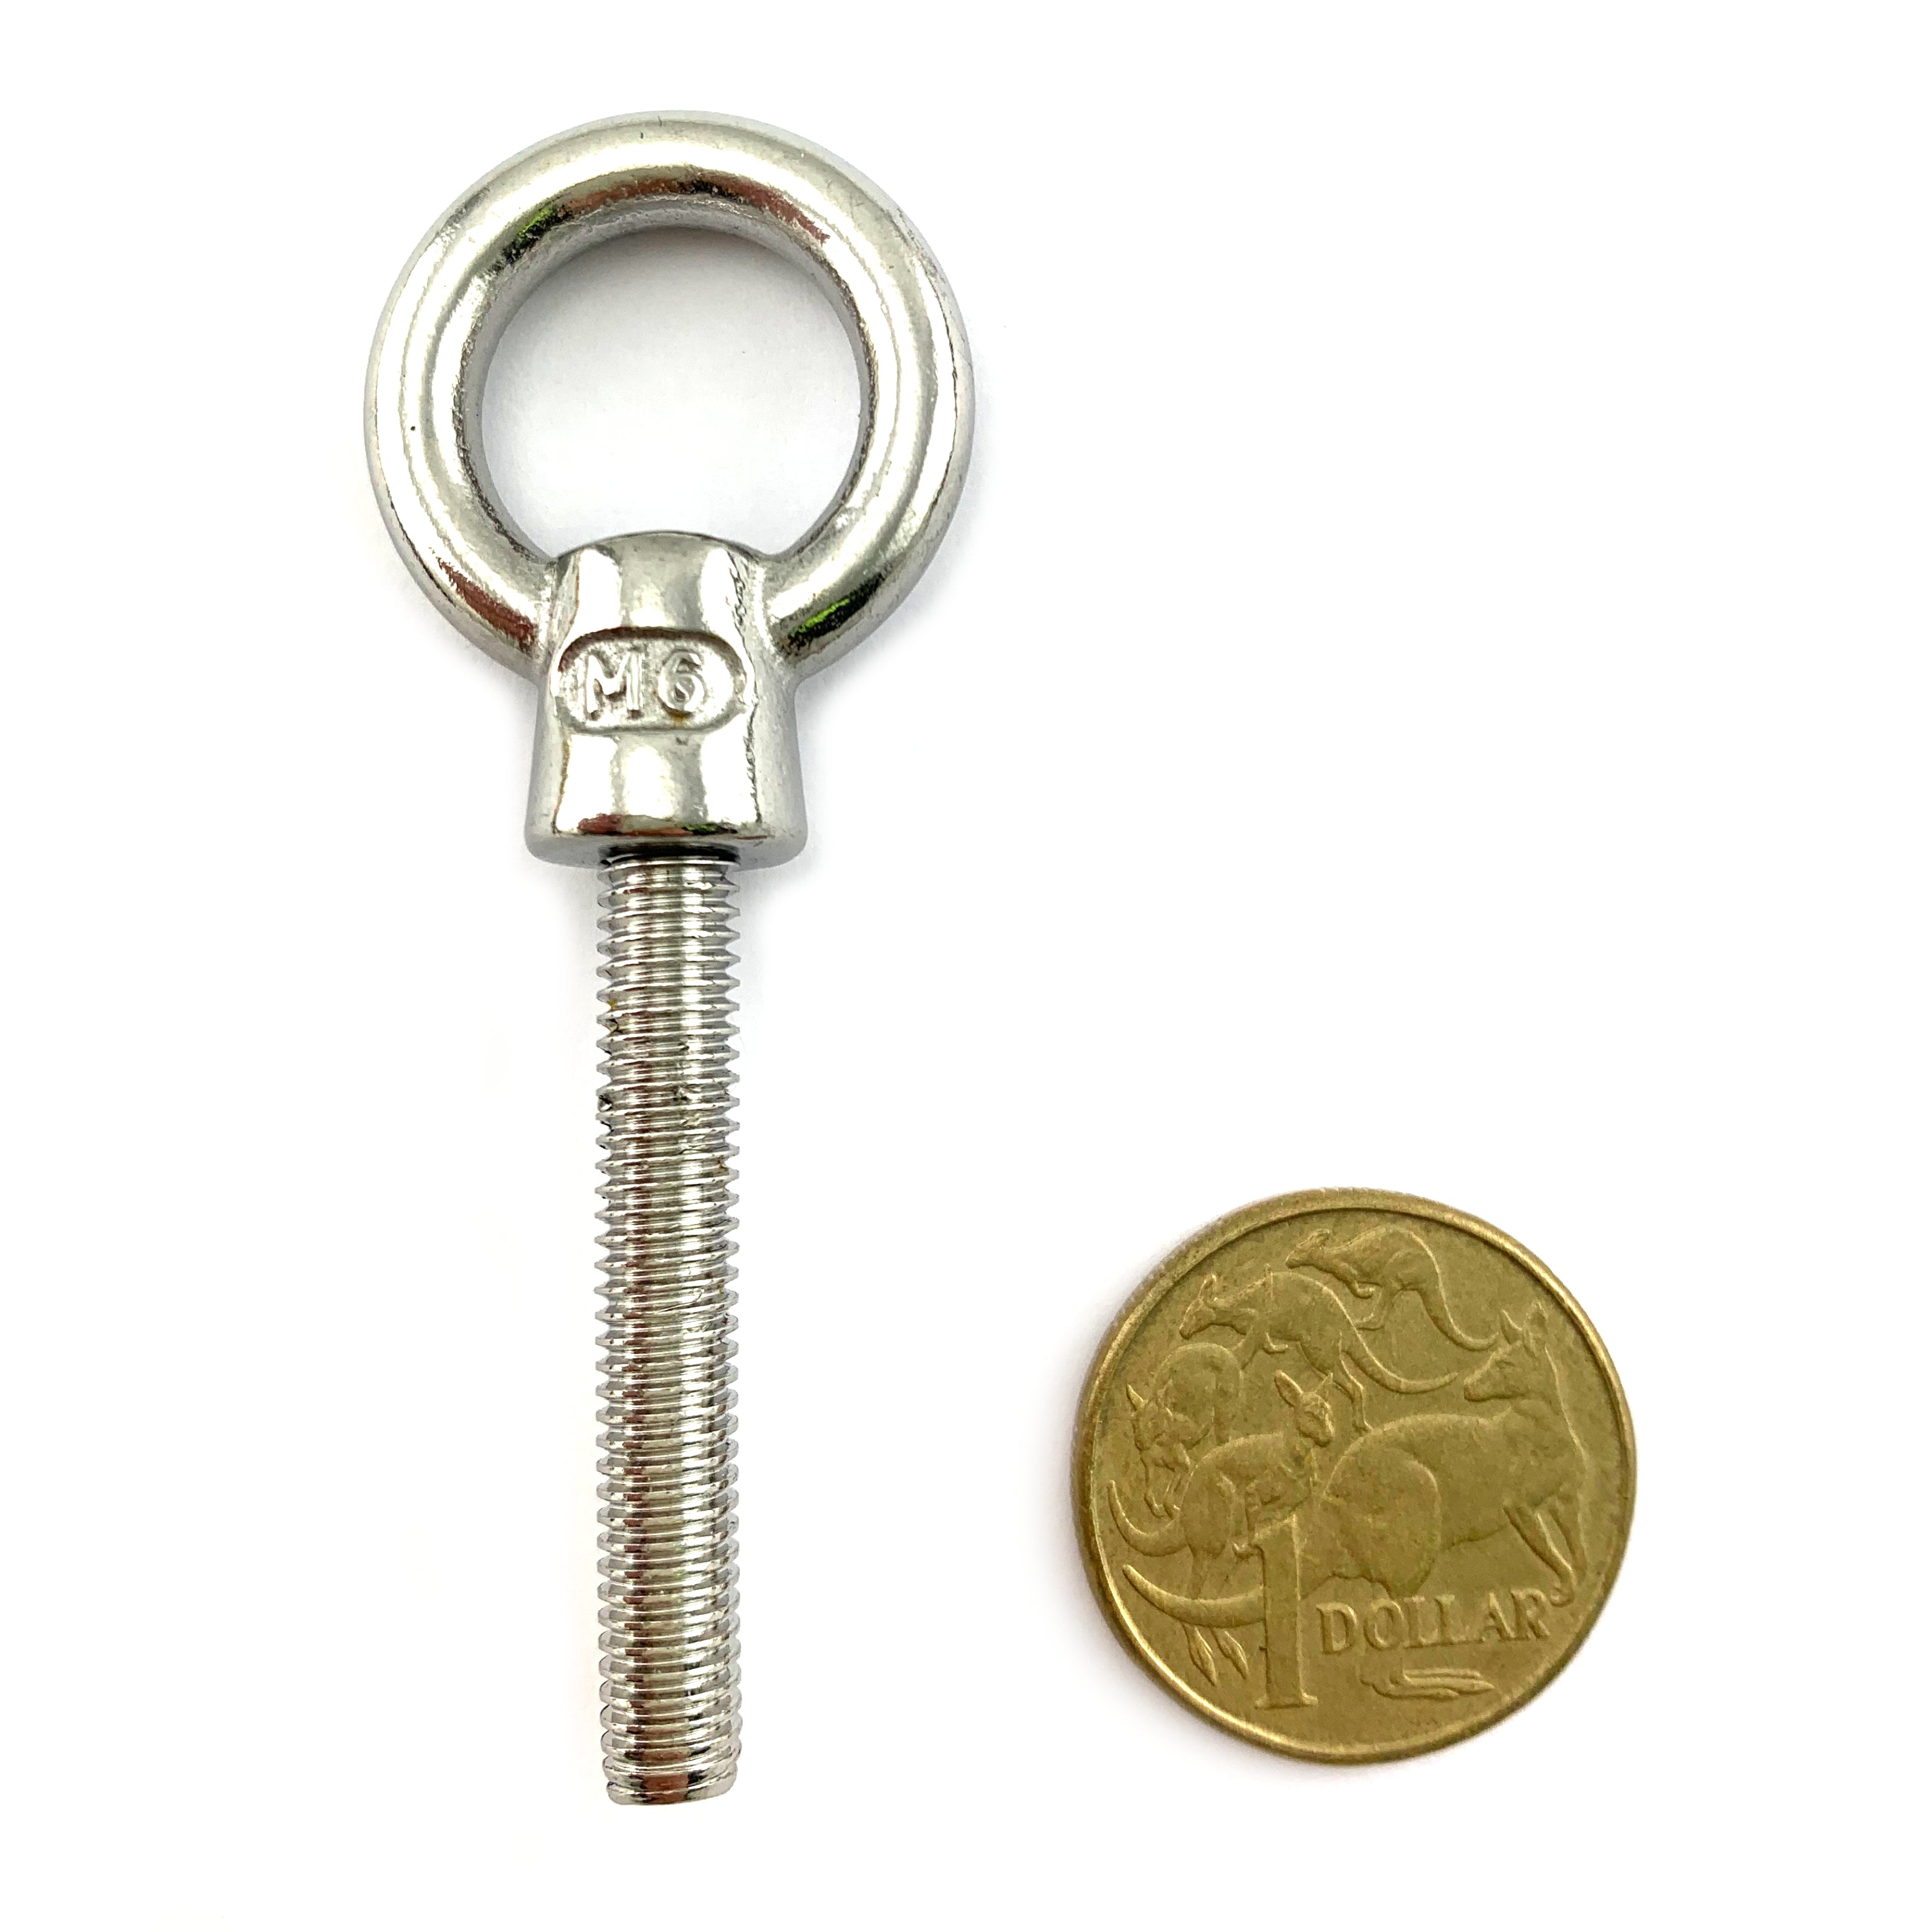 Stainless steel lifting eye bolt, size 6mm with a 47mm thread. Australia